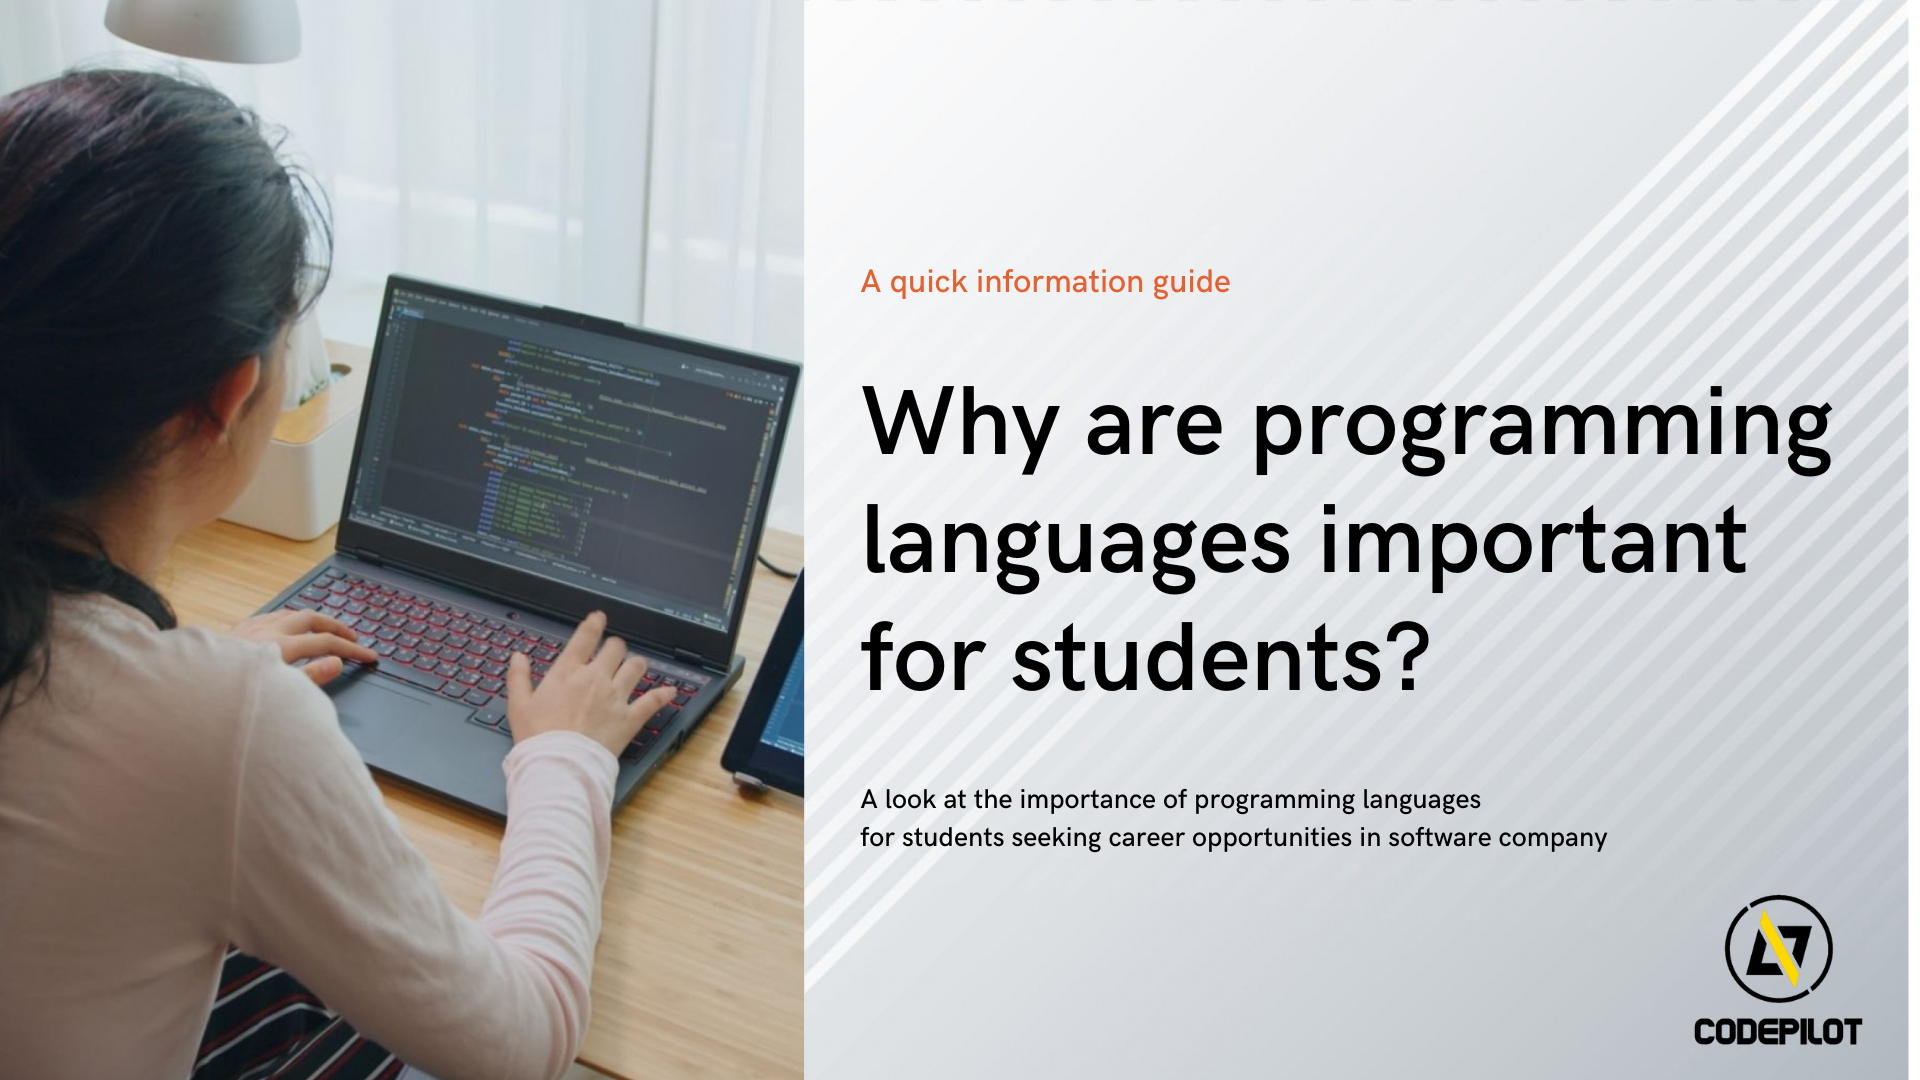 Why are Programming Languages important for students?